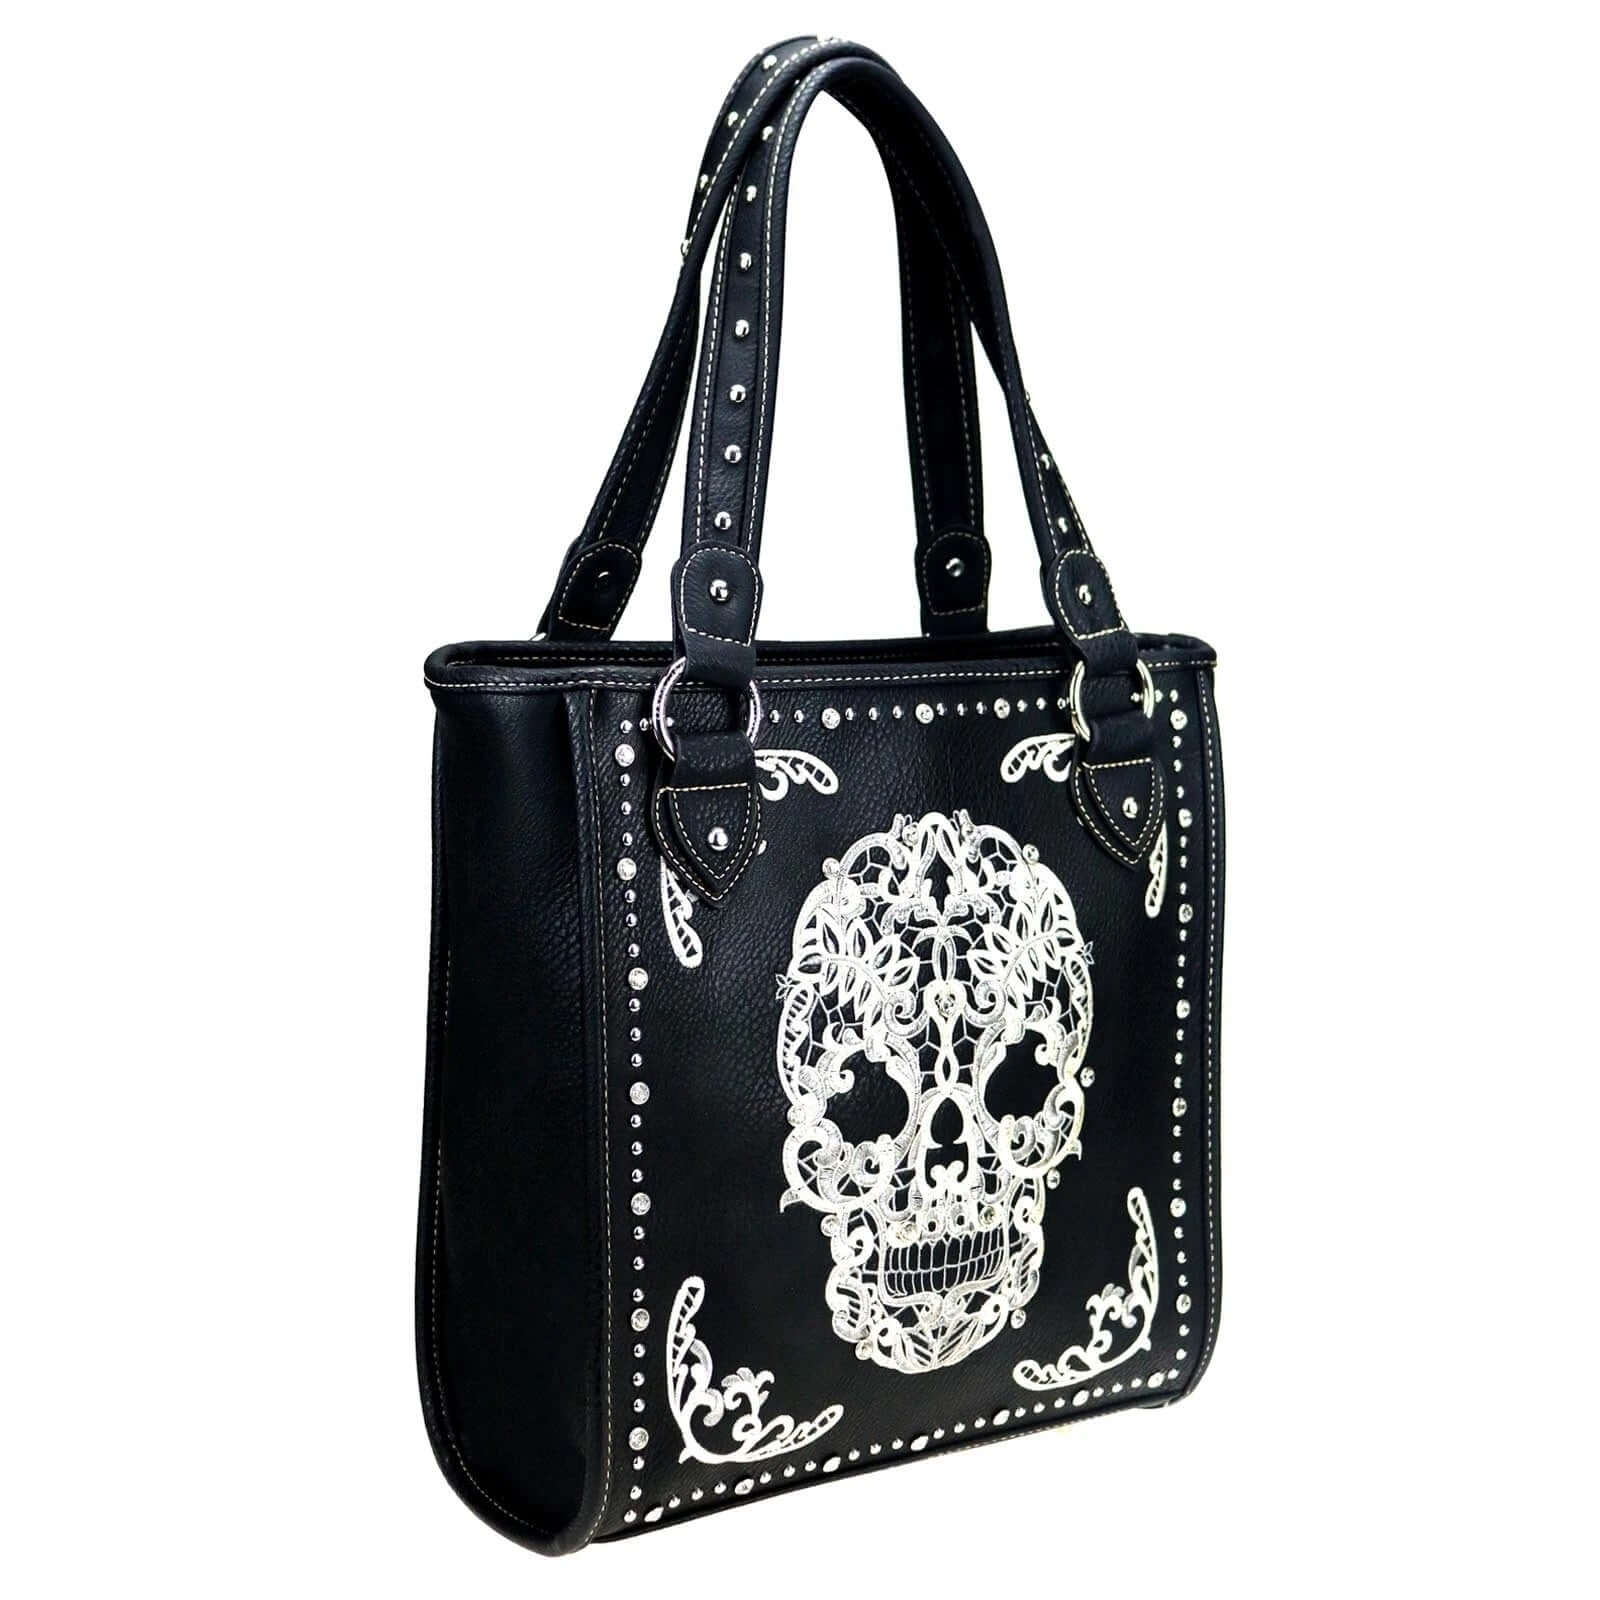 Montana West Sugar Skull Concealed Carry Purse Halloween Tote Bag-MW494G-8113 BK-WT-2